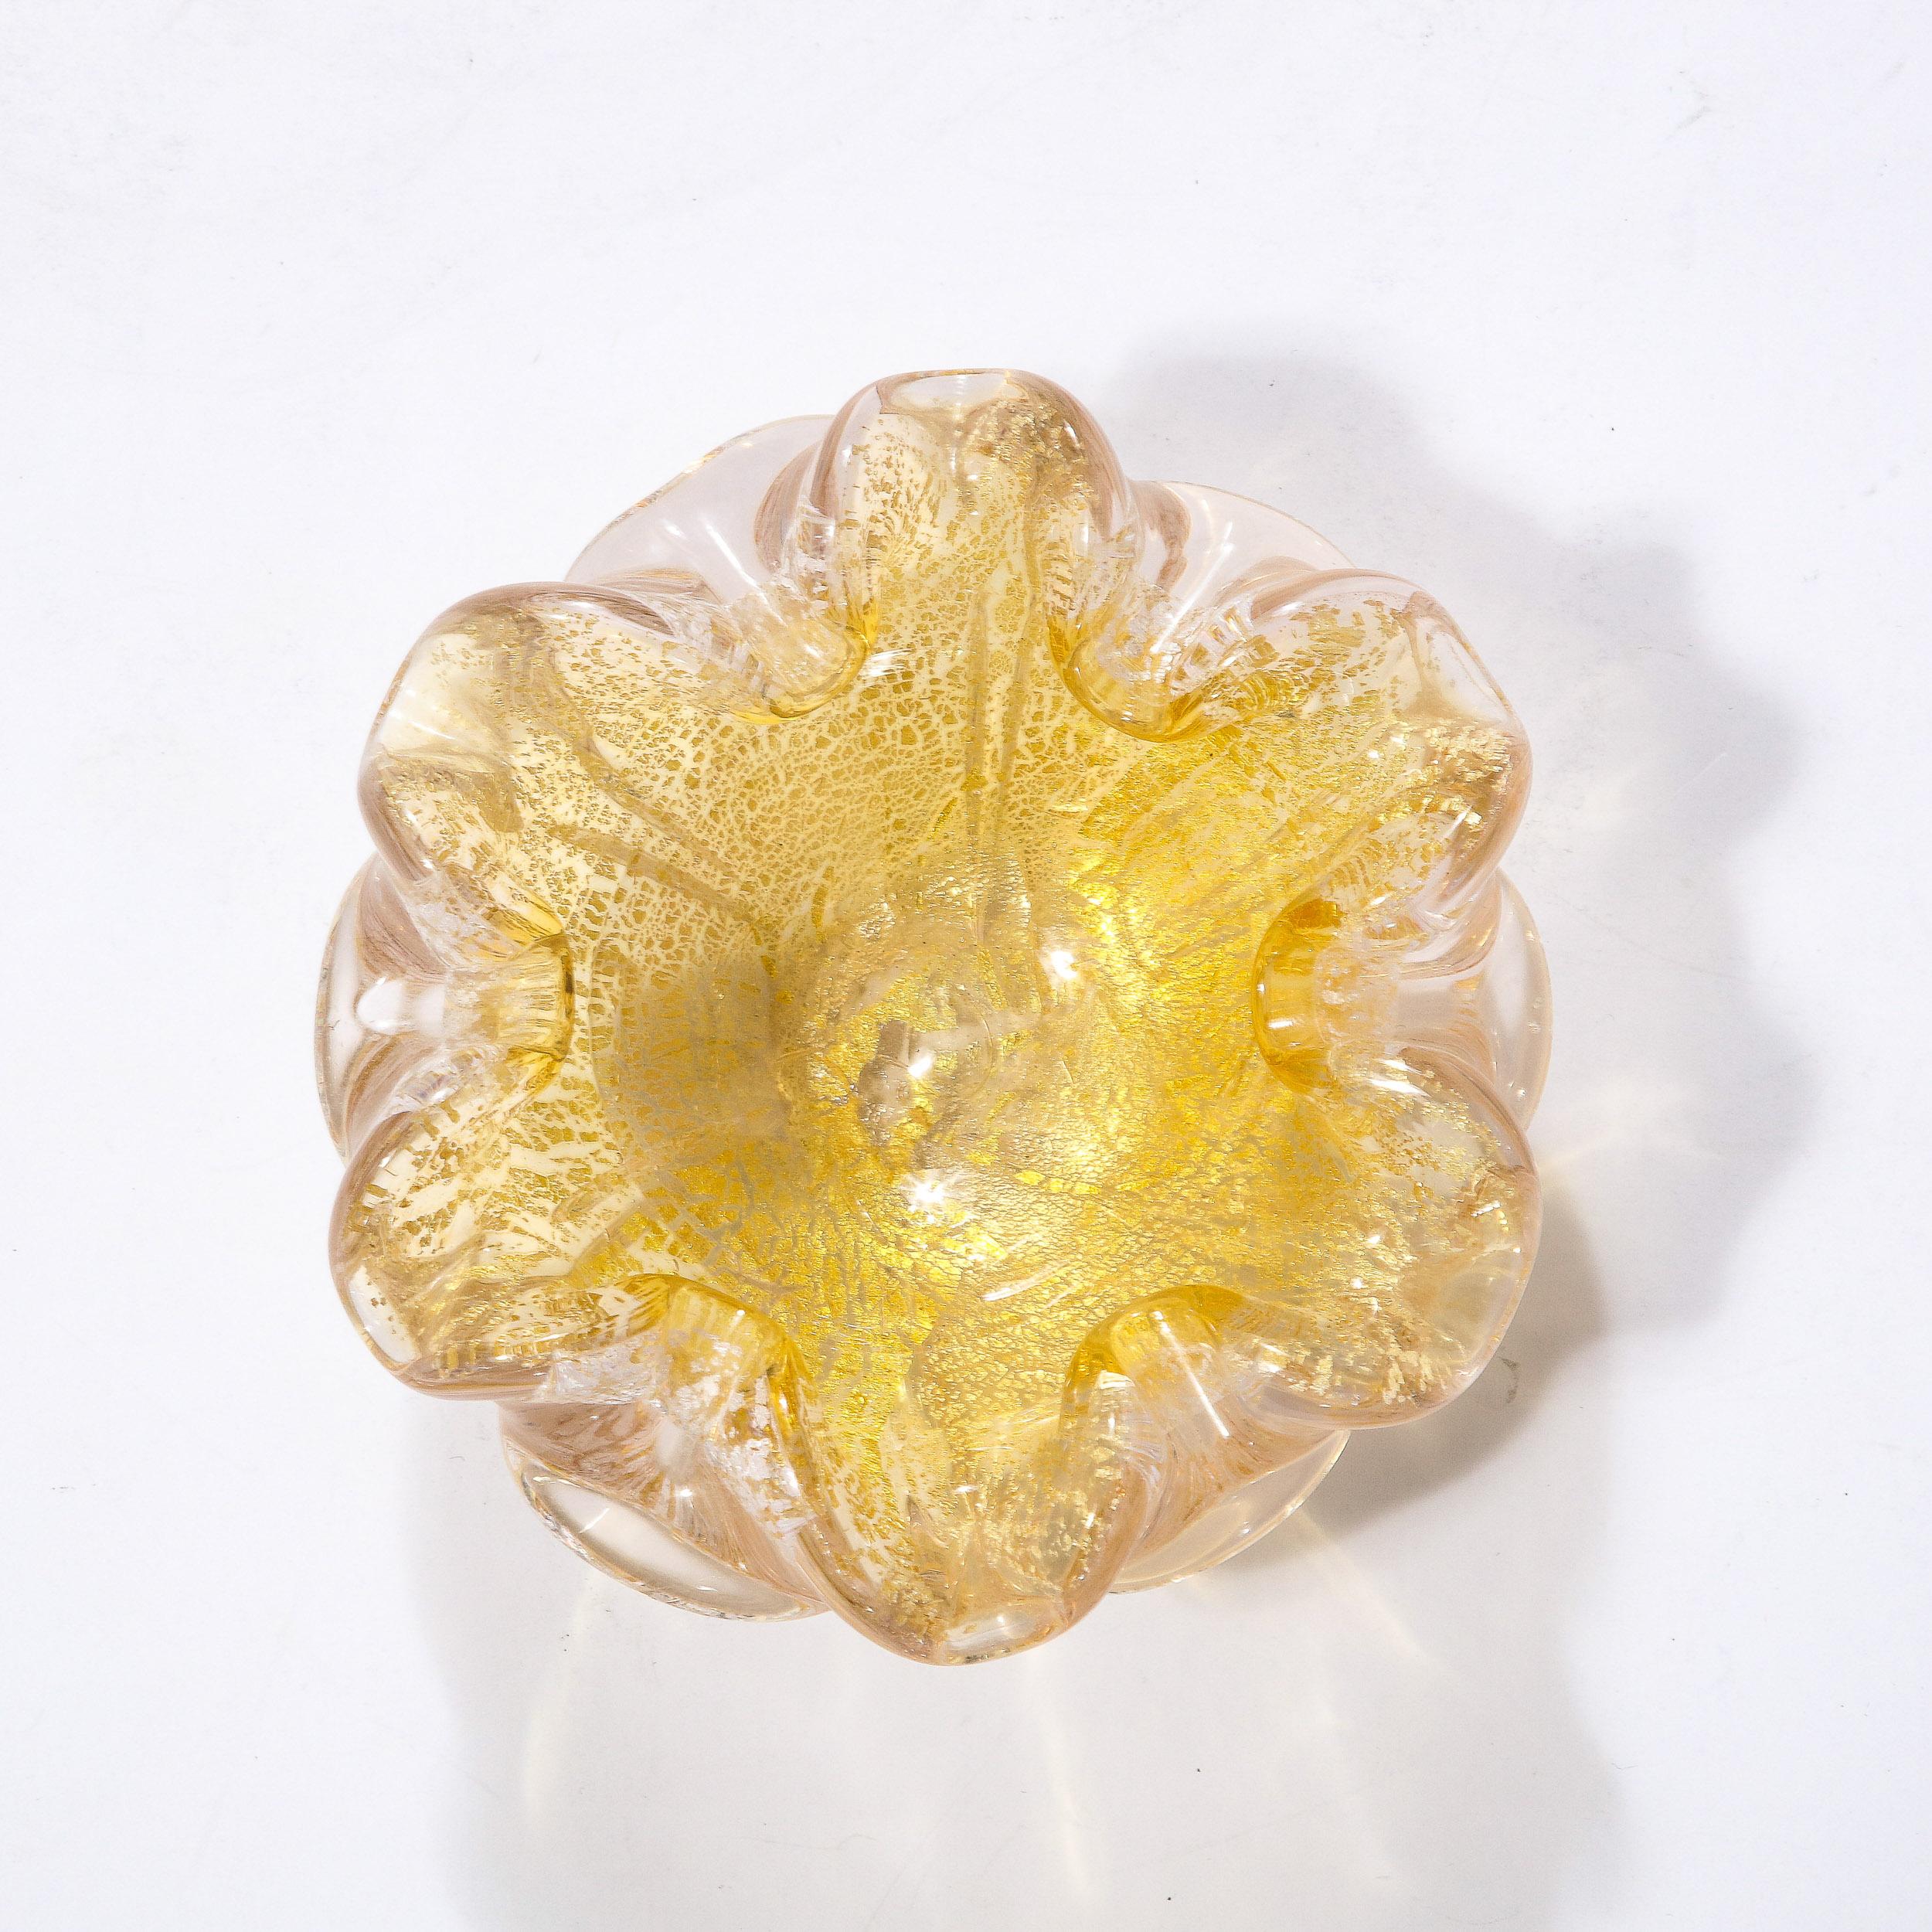 This warm and elegant Mid-Century Modernist Hand-Blown Murano Glass Dish originates from Italy, Circa 1950. Featuring an expansive organic profile reminiscent of a flower in bloom, the piece is hand-blown in stunning transparent glass with 24 Karat